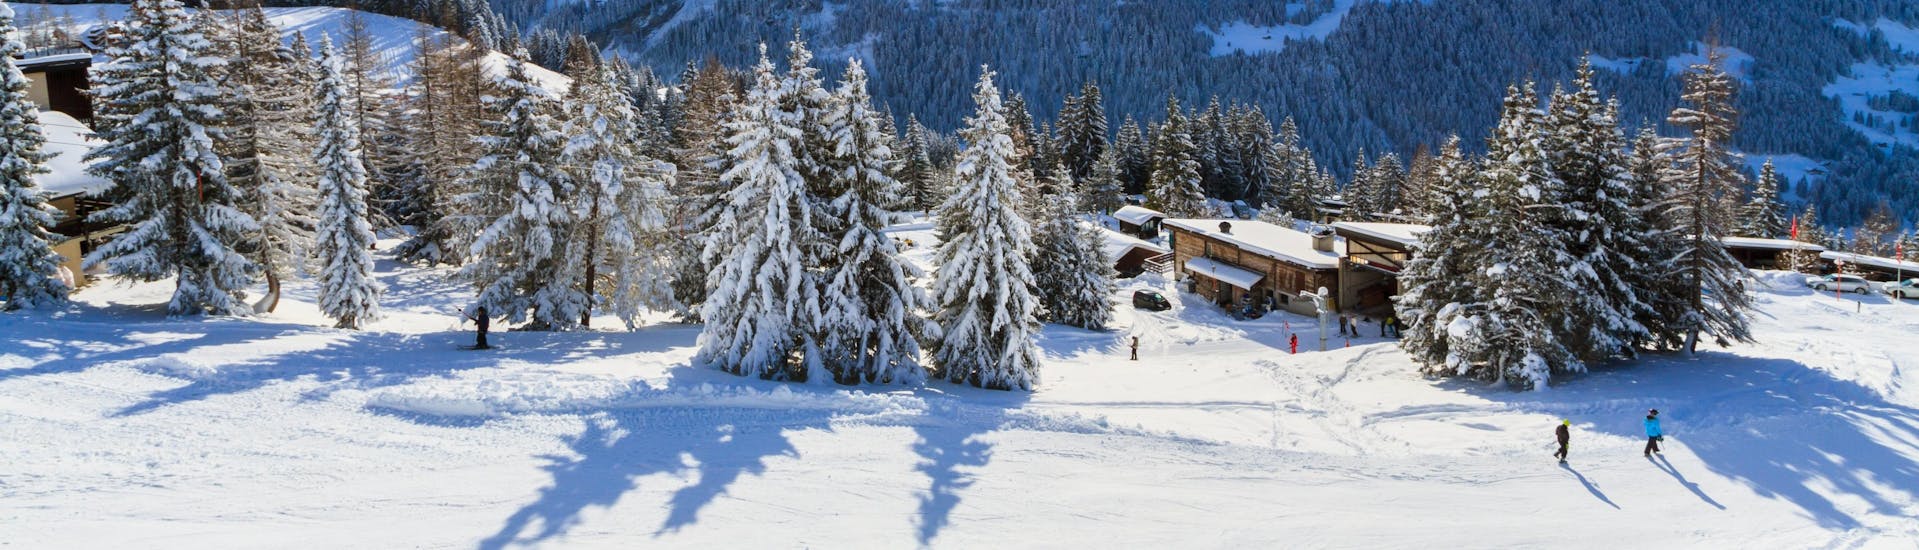 A panoramic view of the ski slopes and the surrounding mountains of Villars, a popular Swiss ski resort  in the canton of Vaud where visitors can book ski lessons with one of the local ski schools.